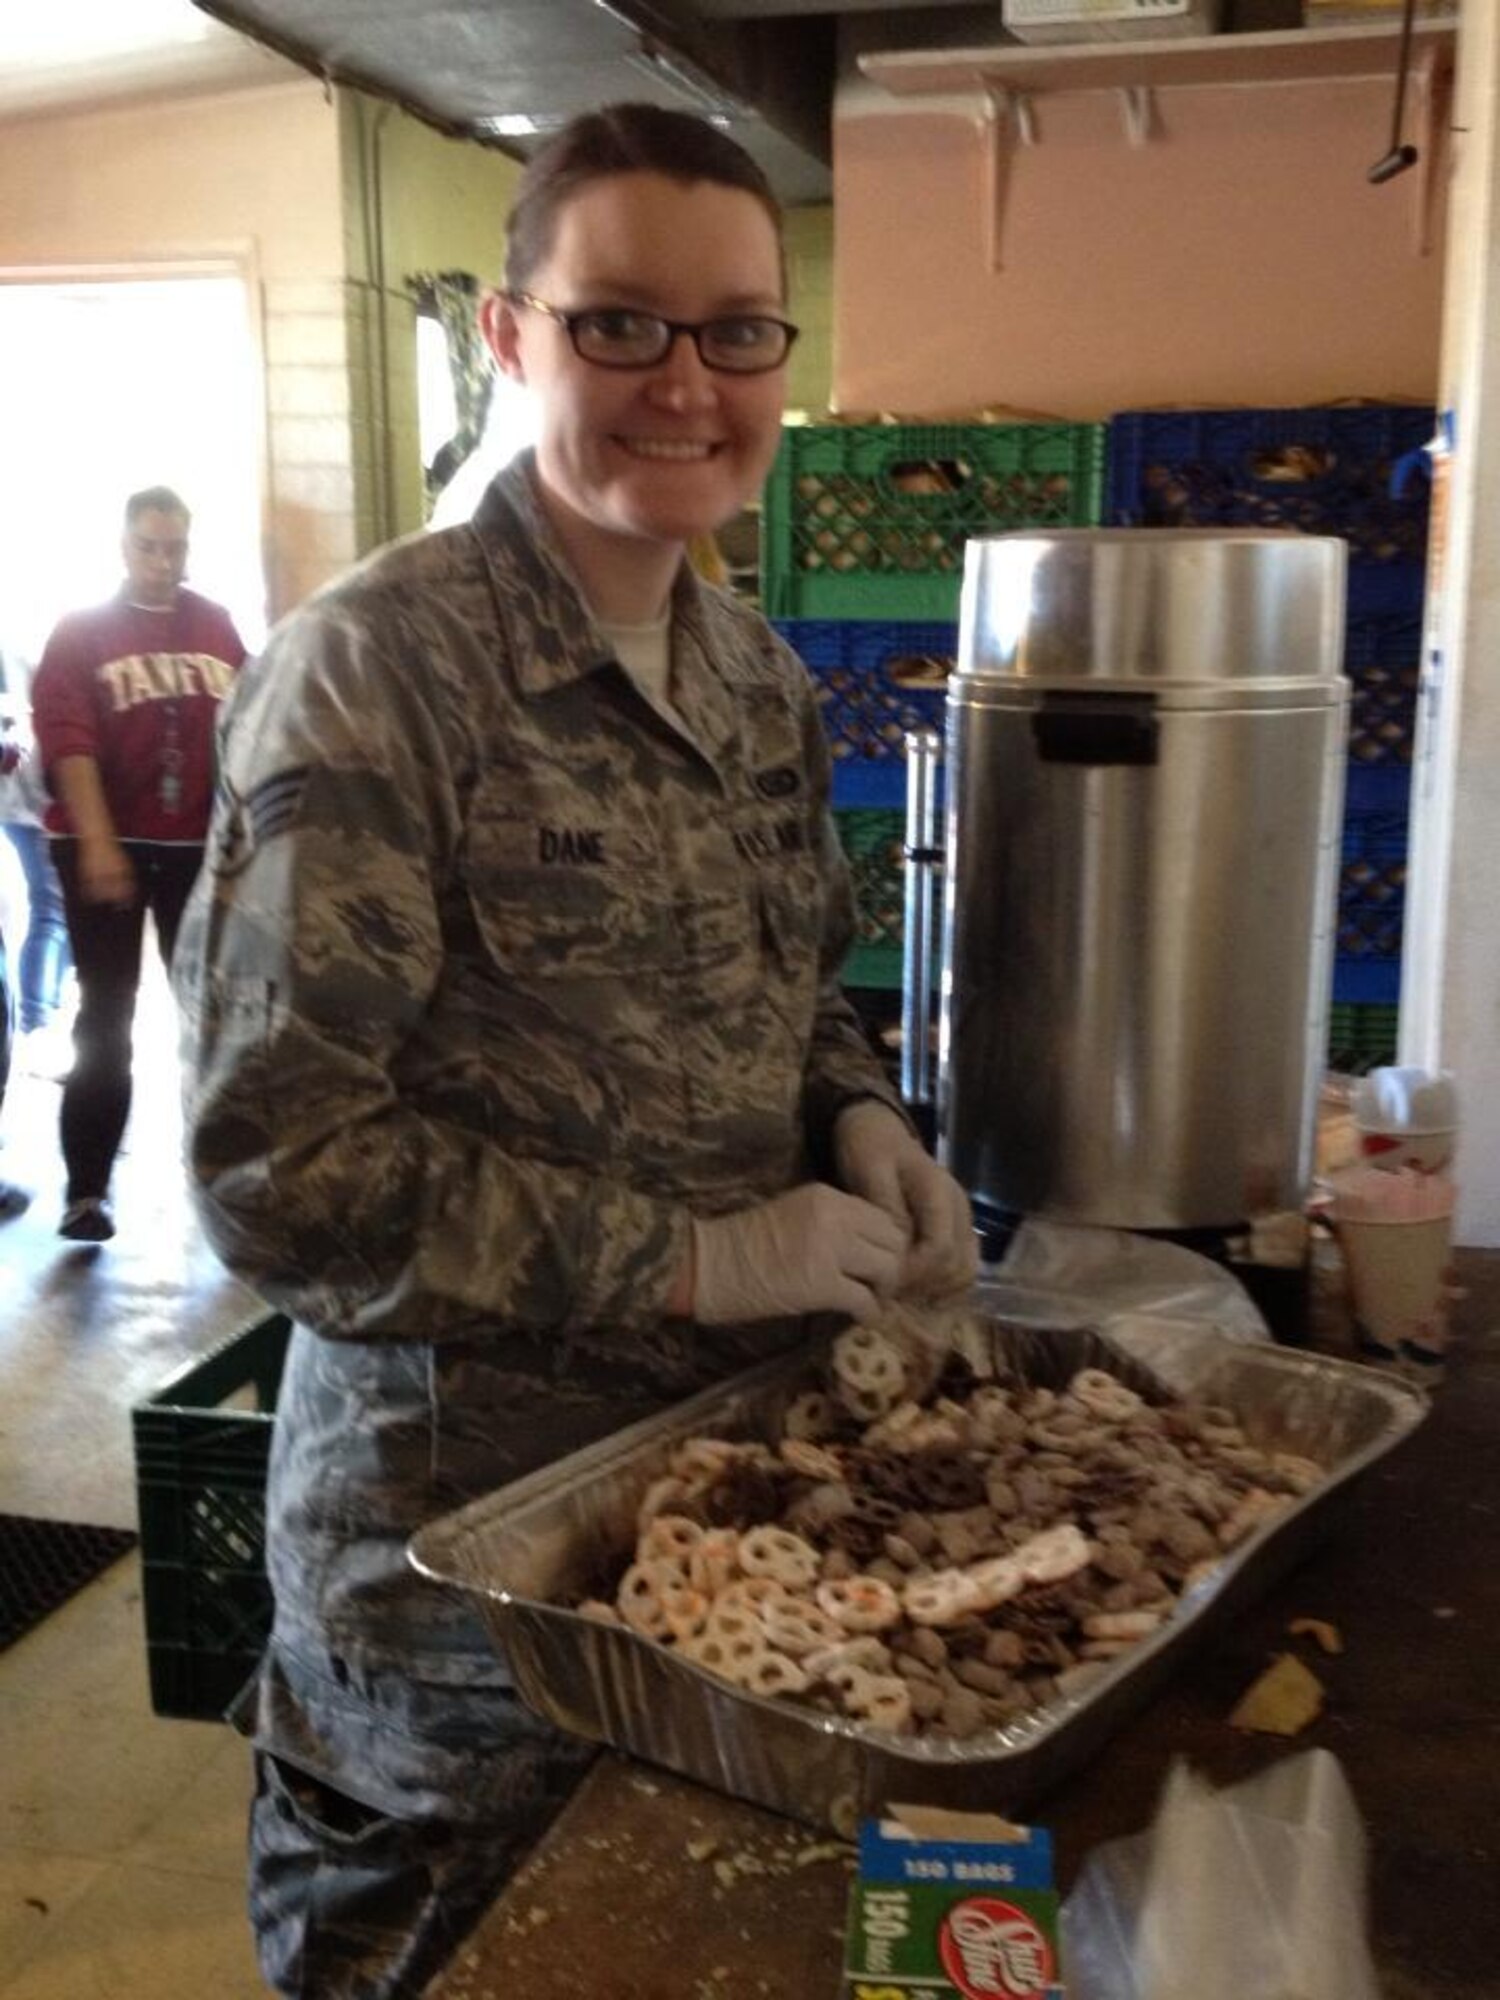 Senior Airman Jennifer Dane, 612th Air and Space Operations Center, prepares meals for hundreds of homeless individuals in Tucson, Ariz., Dec. 5. Members of 12th Air Force dedicated 3 hours of their time volunteering their services at Casa Maria, a Tucson organization dedicated to helping those in need. (USAF photo by Master Sgt. Kelly Ogden/Released).